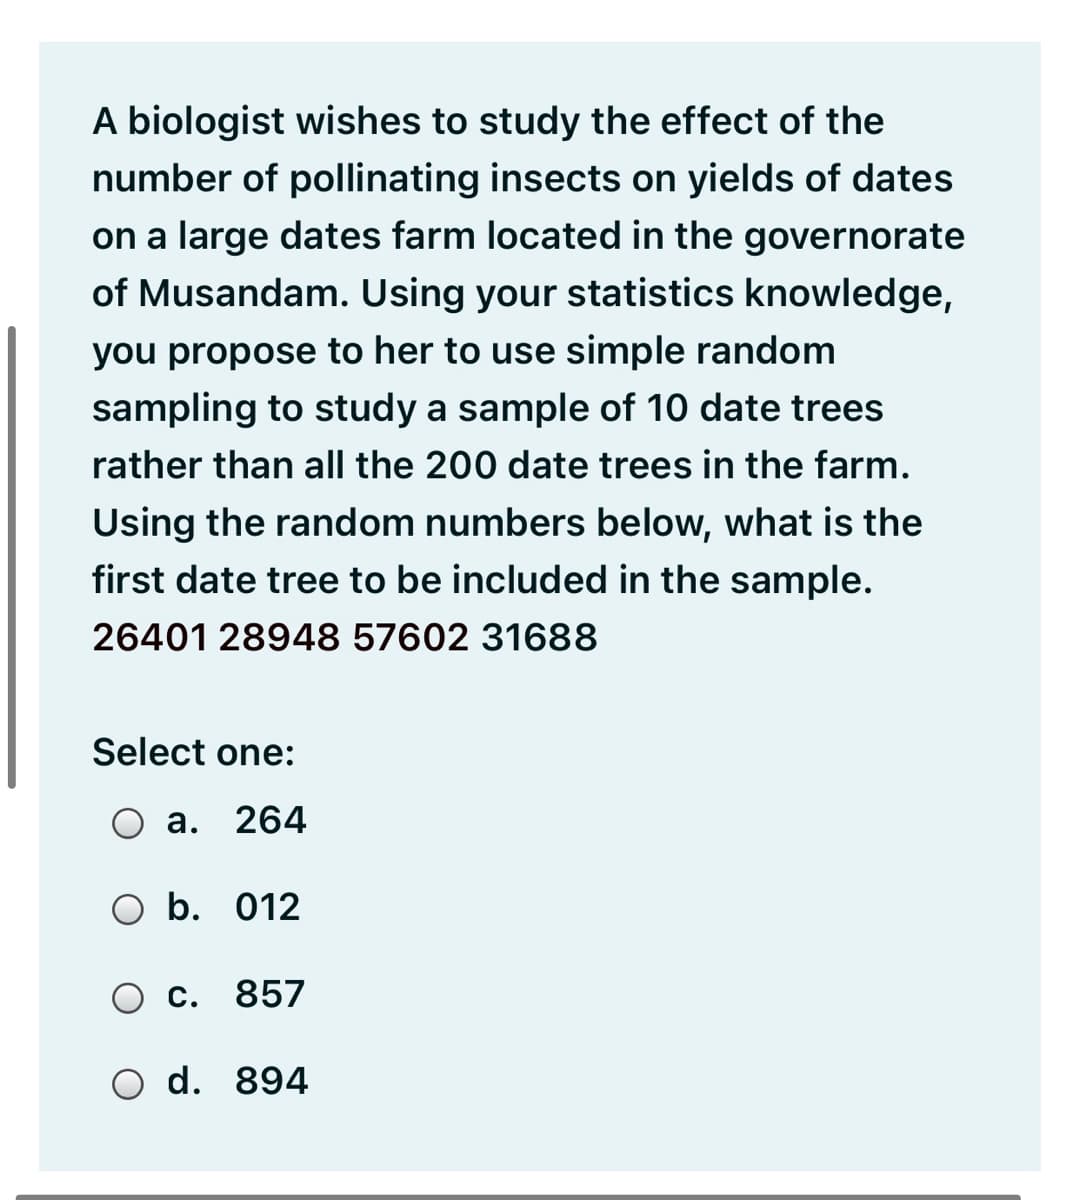 A biologist wishes to study the effect of the
number of pollinating insects on yields of dates
on a large dates farm located in the governorate
of Musandam. Using your statistics knowledge,
you propose to her to use simple random
sampling to study a sample of 10 date trees
rather than all the 200 date trees in the farm.
Using the random numbers below, what is the
first date tree to be included in the sample.
26401 28948 57602 31688
Select one:
O a.
264
O b. 012
Ос.
857
O d. 894
